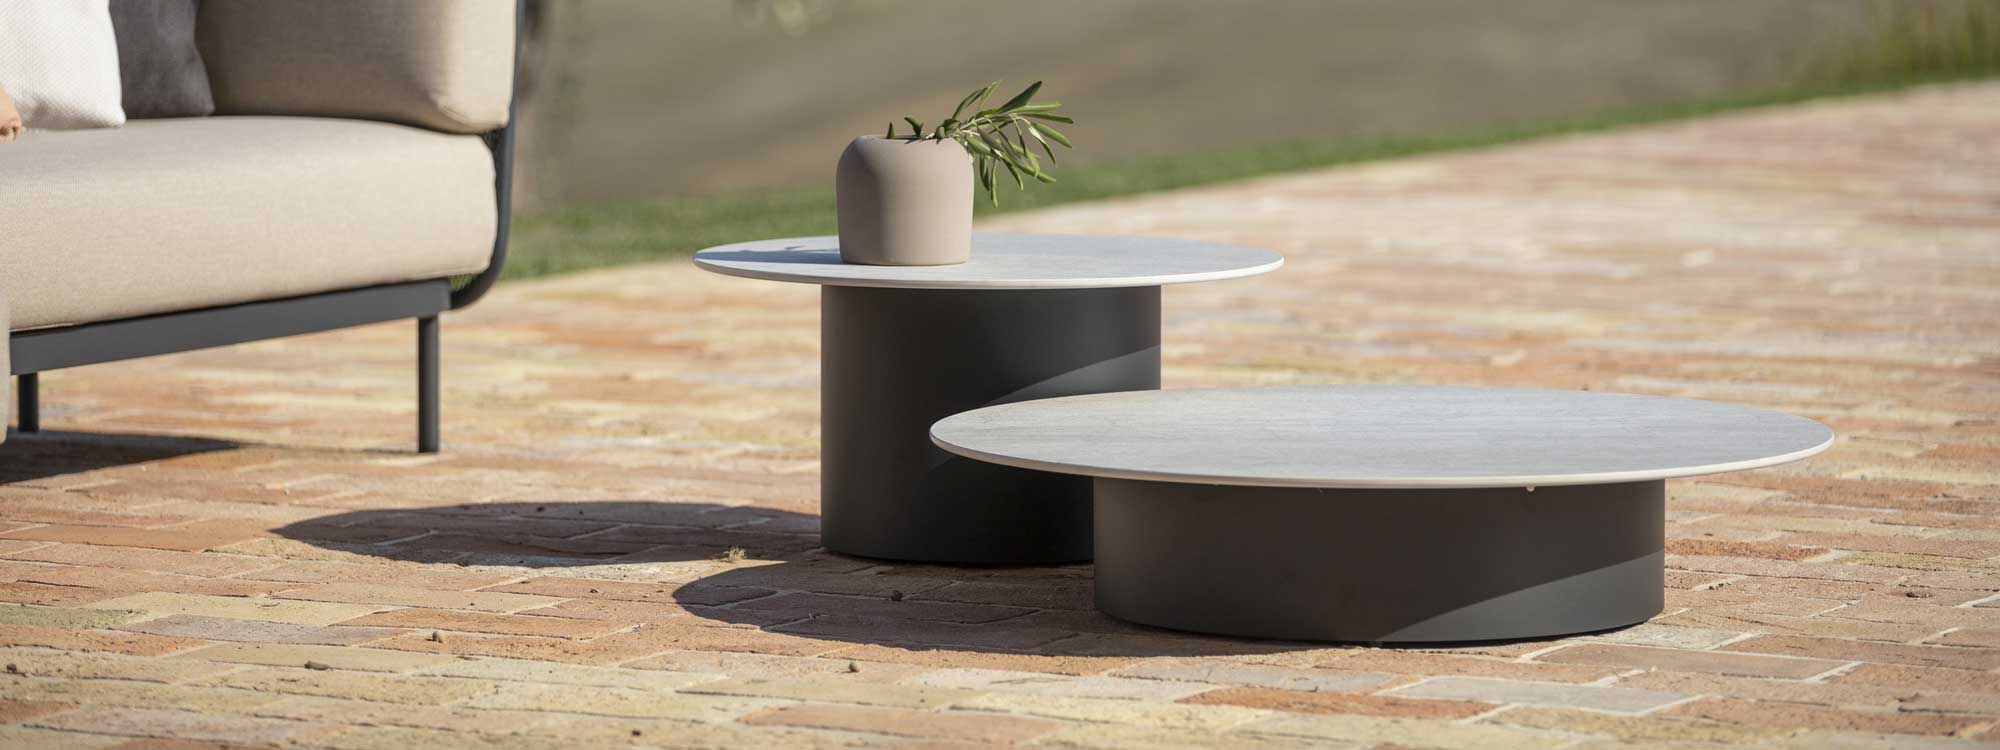 Image of pair of different heights of Todus Branta outdoor low tables next to Baza garden sofa on sunny terrace